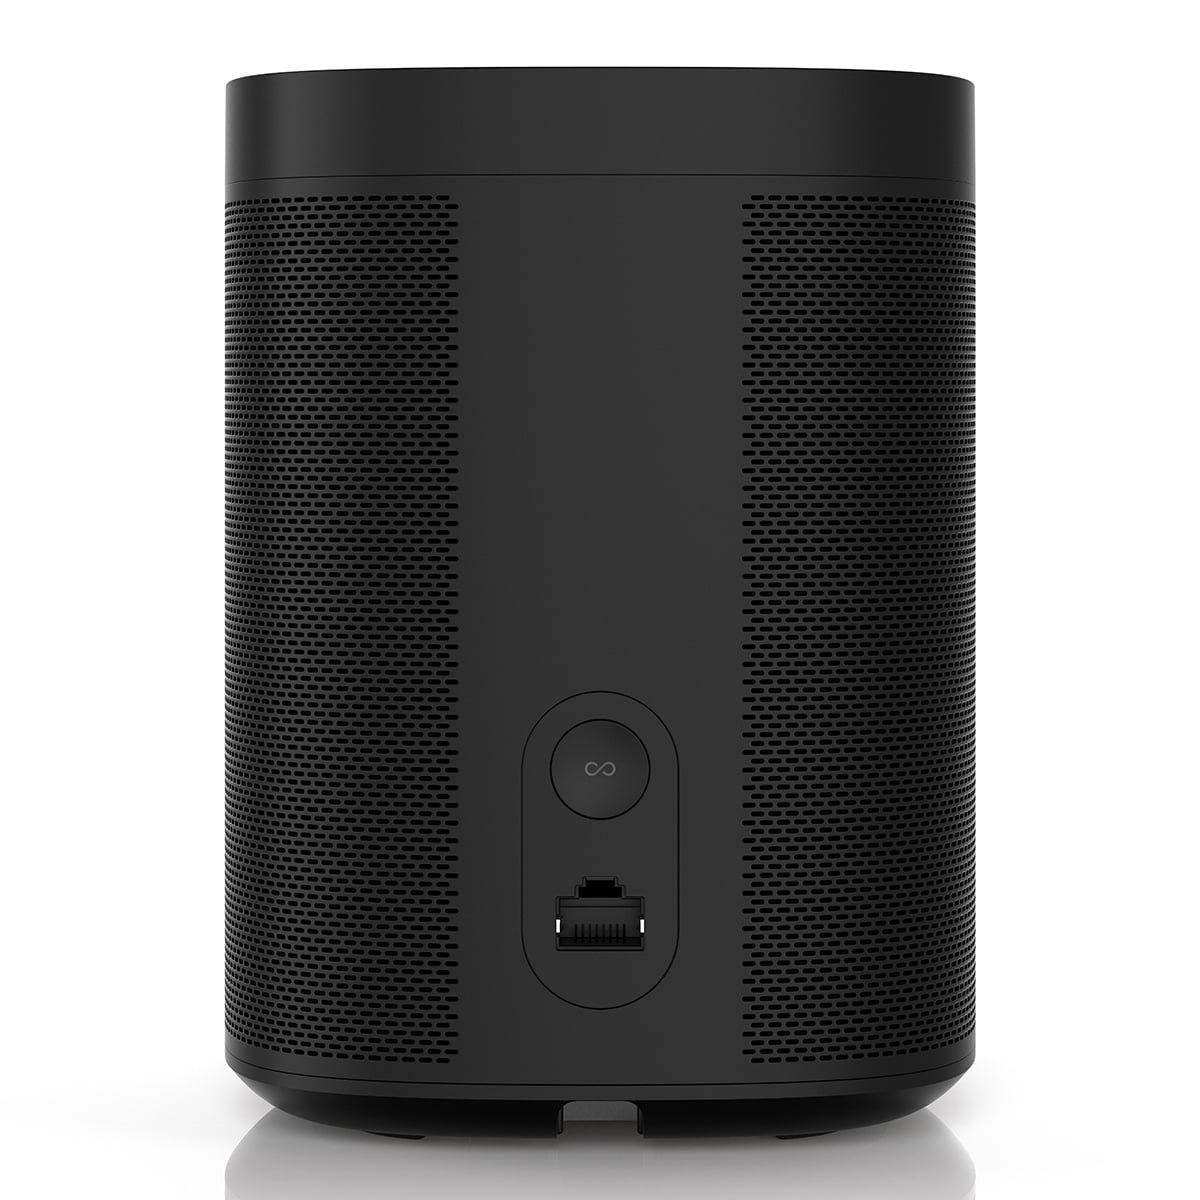 Sonos One SL Speaker for Stereo Pairing and Home Theater Surrounds (Black)